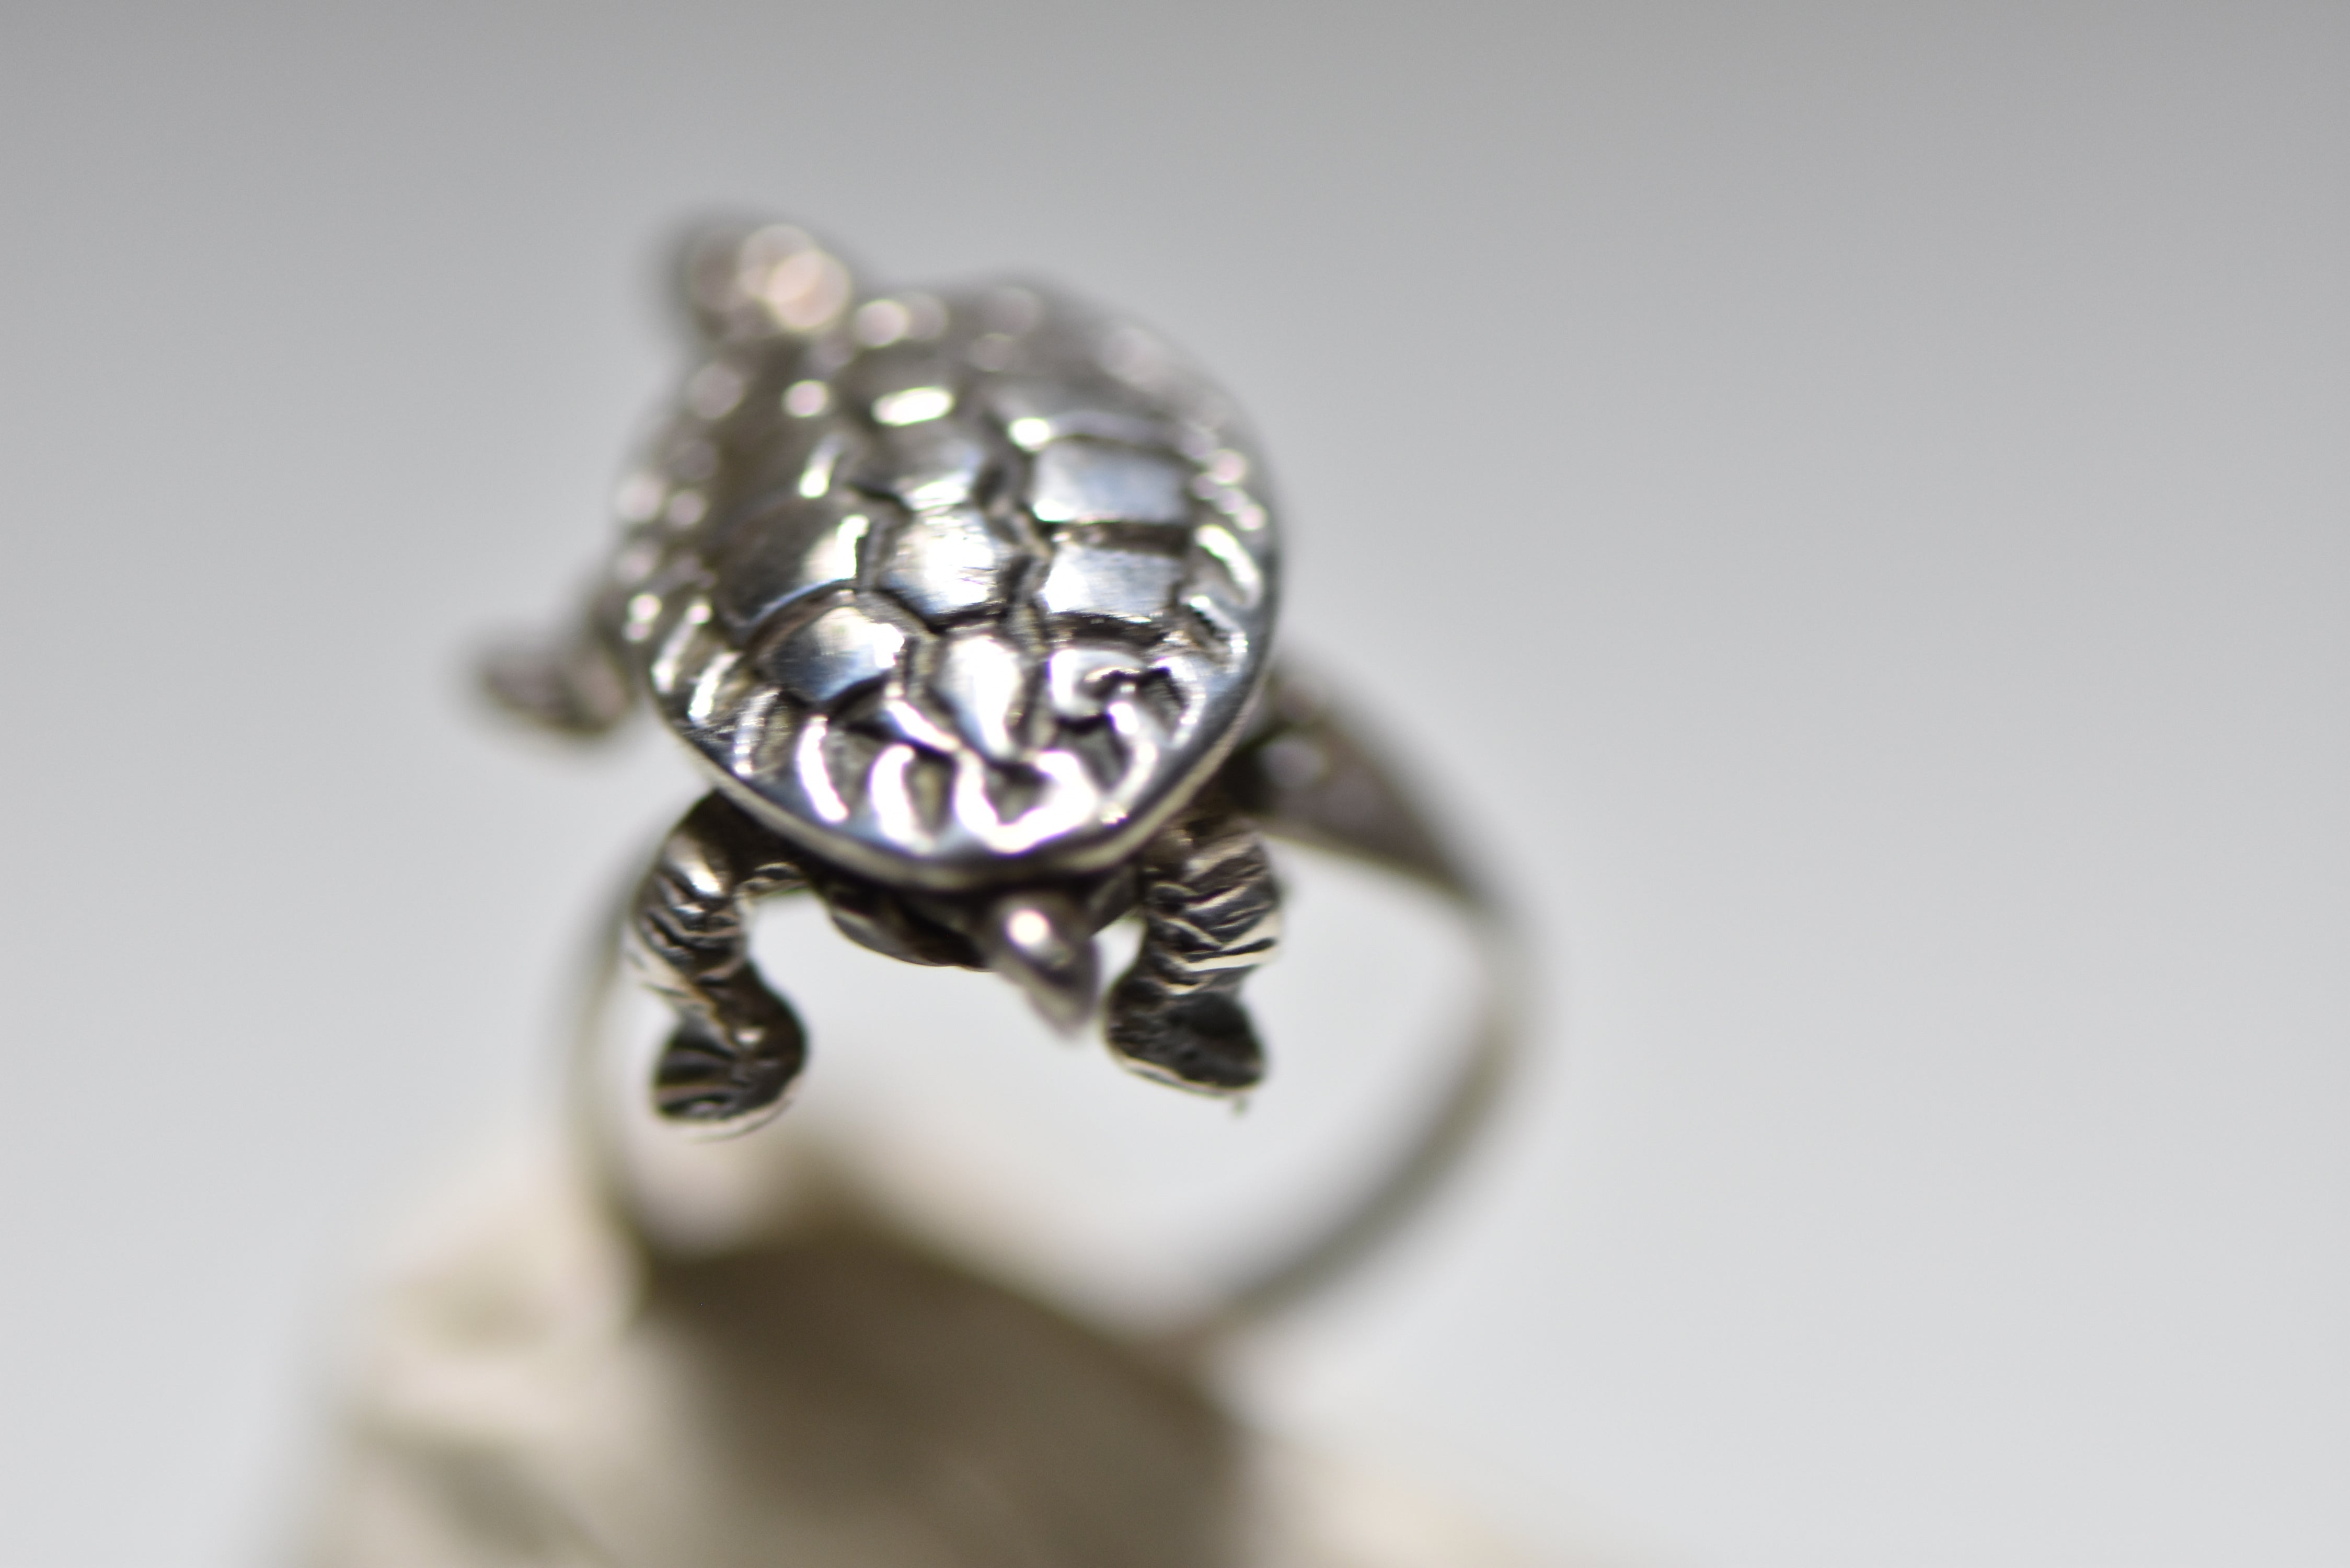 Amazon.com: Tortoise Ring, Sterling Silver Turtle Ring, 925, Boho, Gypsy,  Festival Jewelry, Hippie Jewelry, Nature, Animal Jewelry : Handmade Products